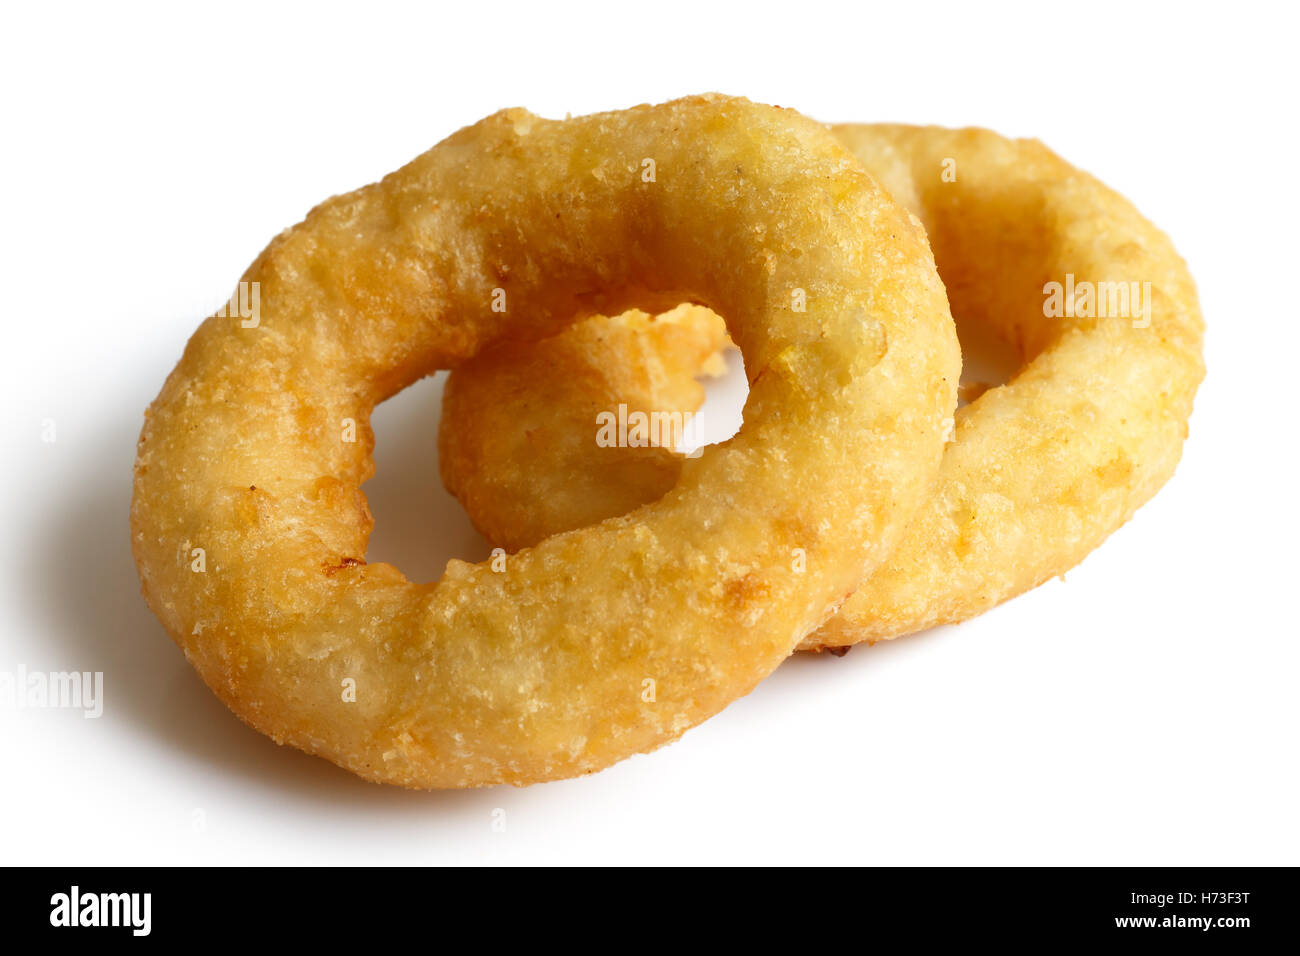 Two deep fried onion or calamari rings isolated on white. Stock Photo